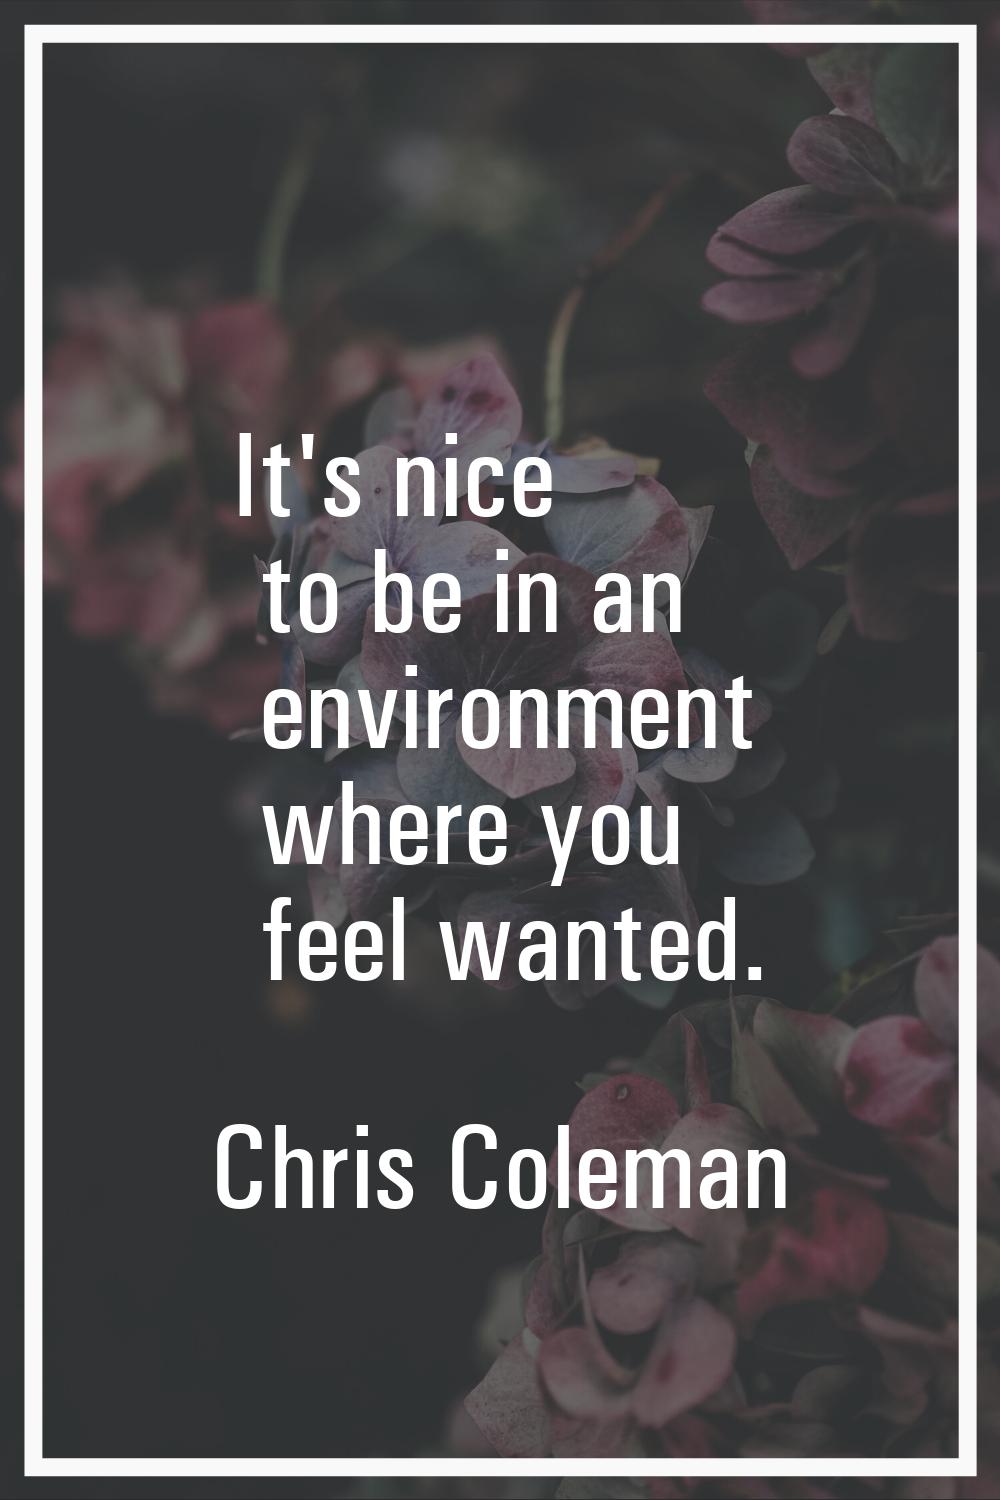 It's nice to be in an environment where you feel wanted.